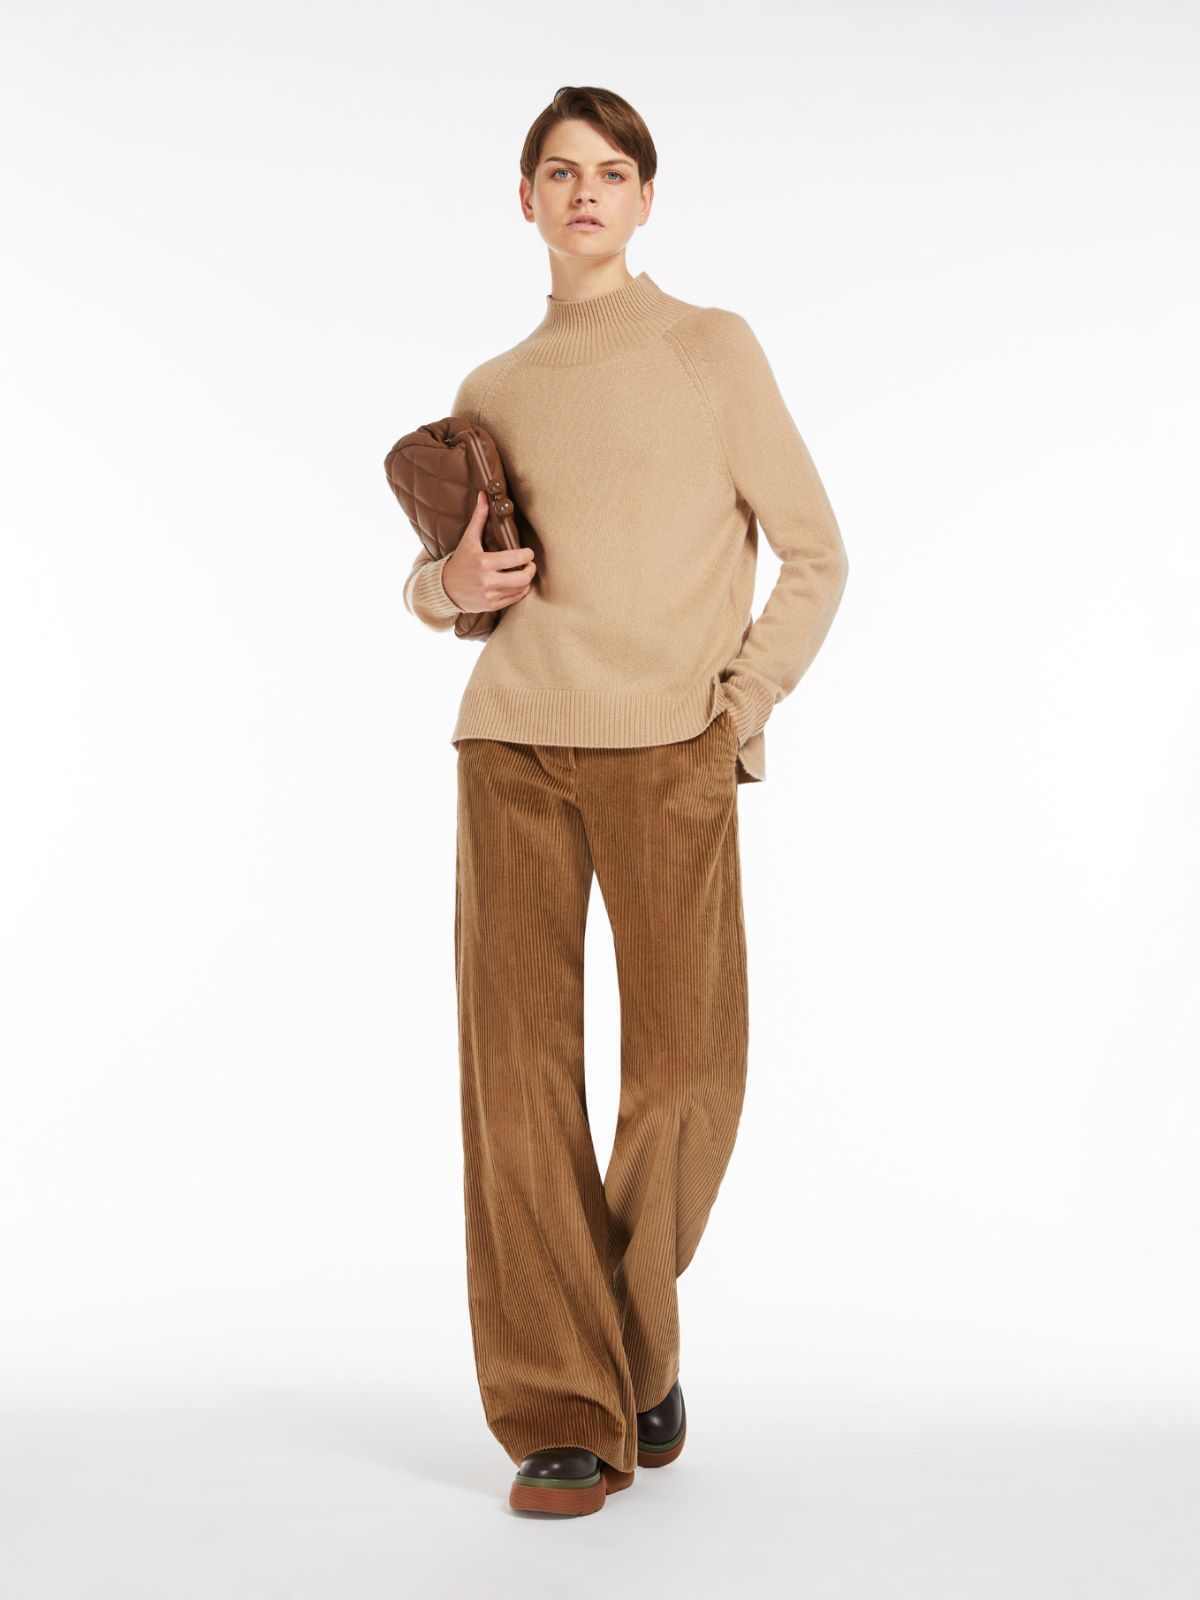 Velour Pullon Trousers at Cotton Traders